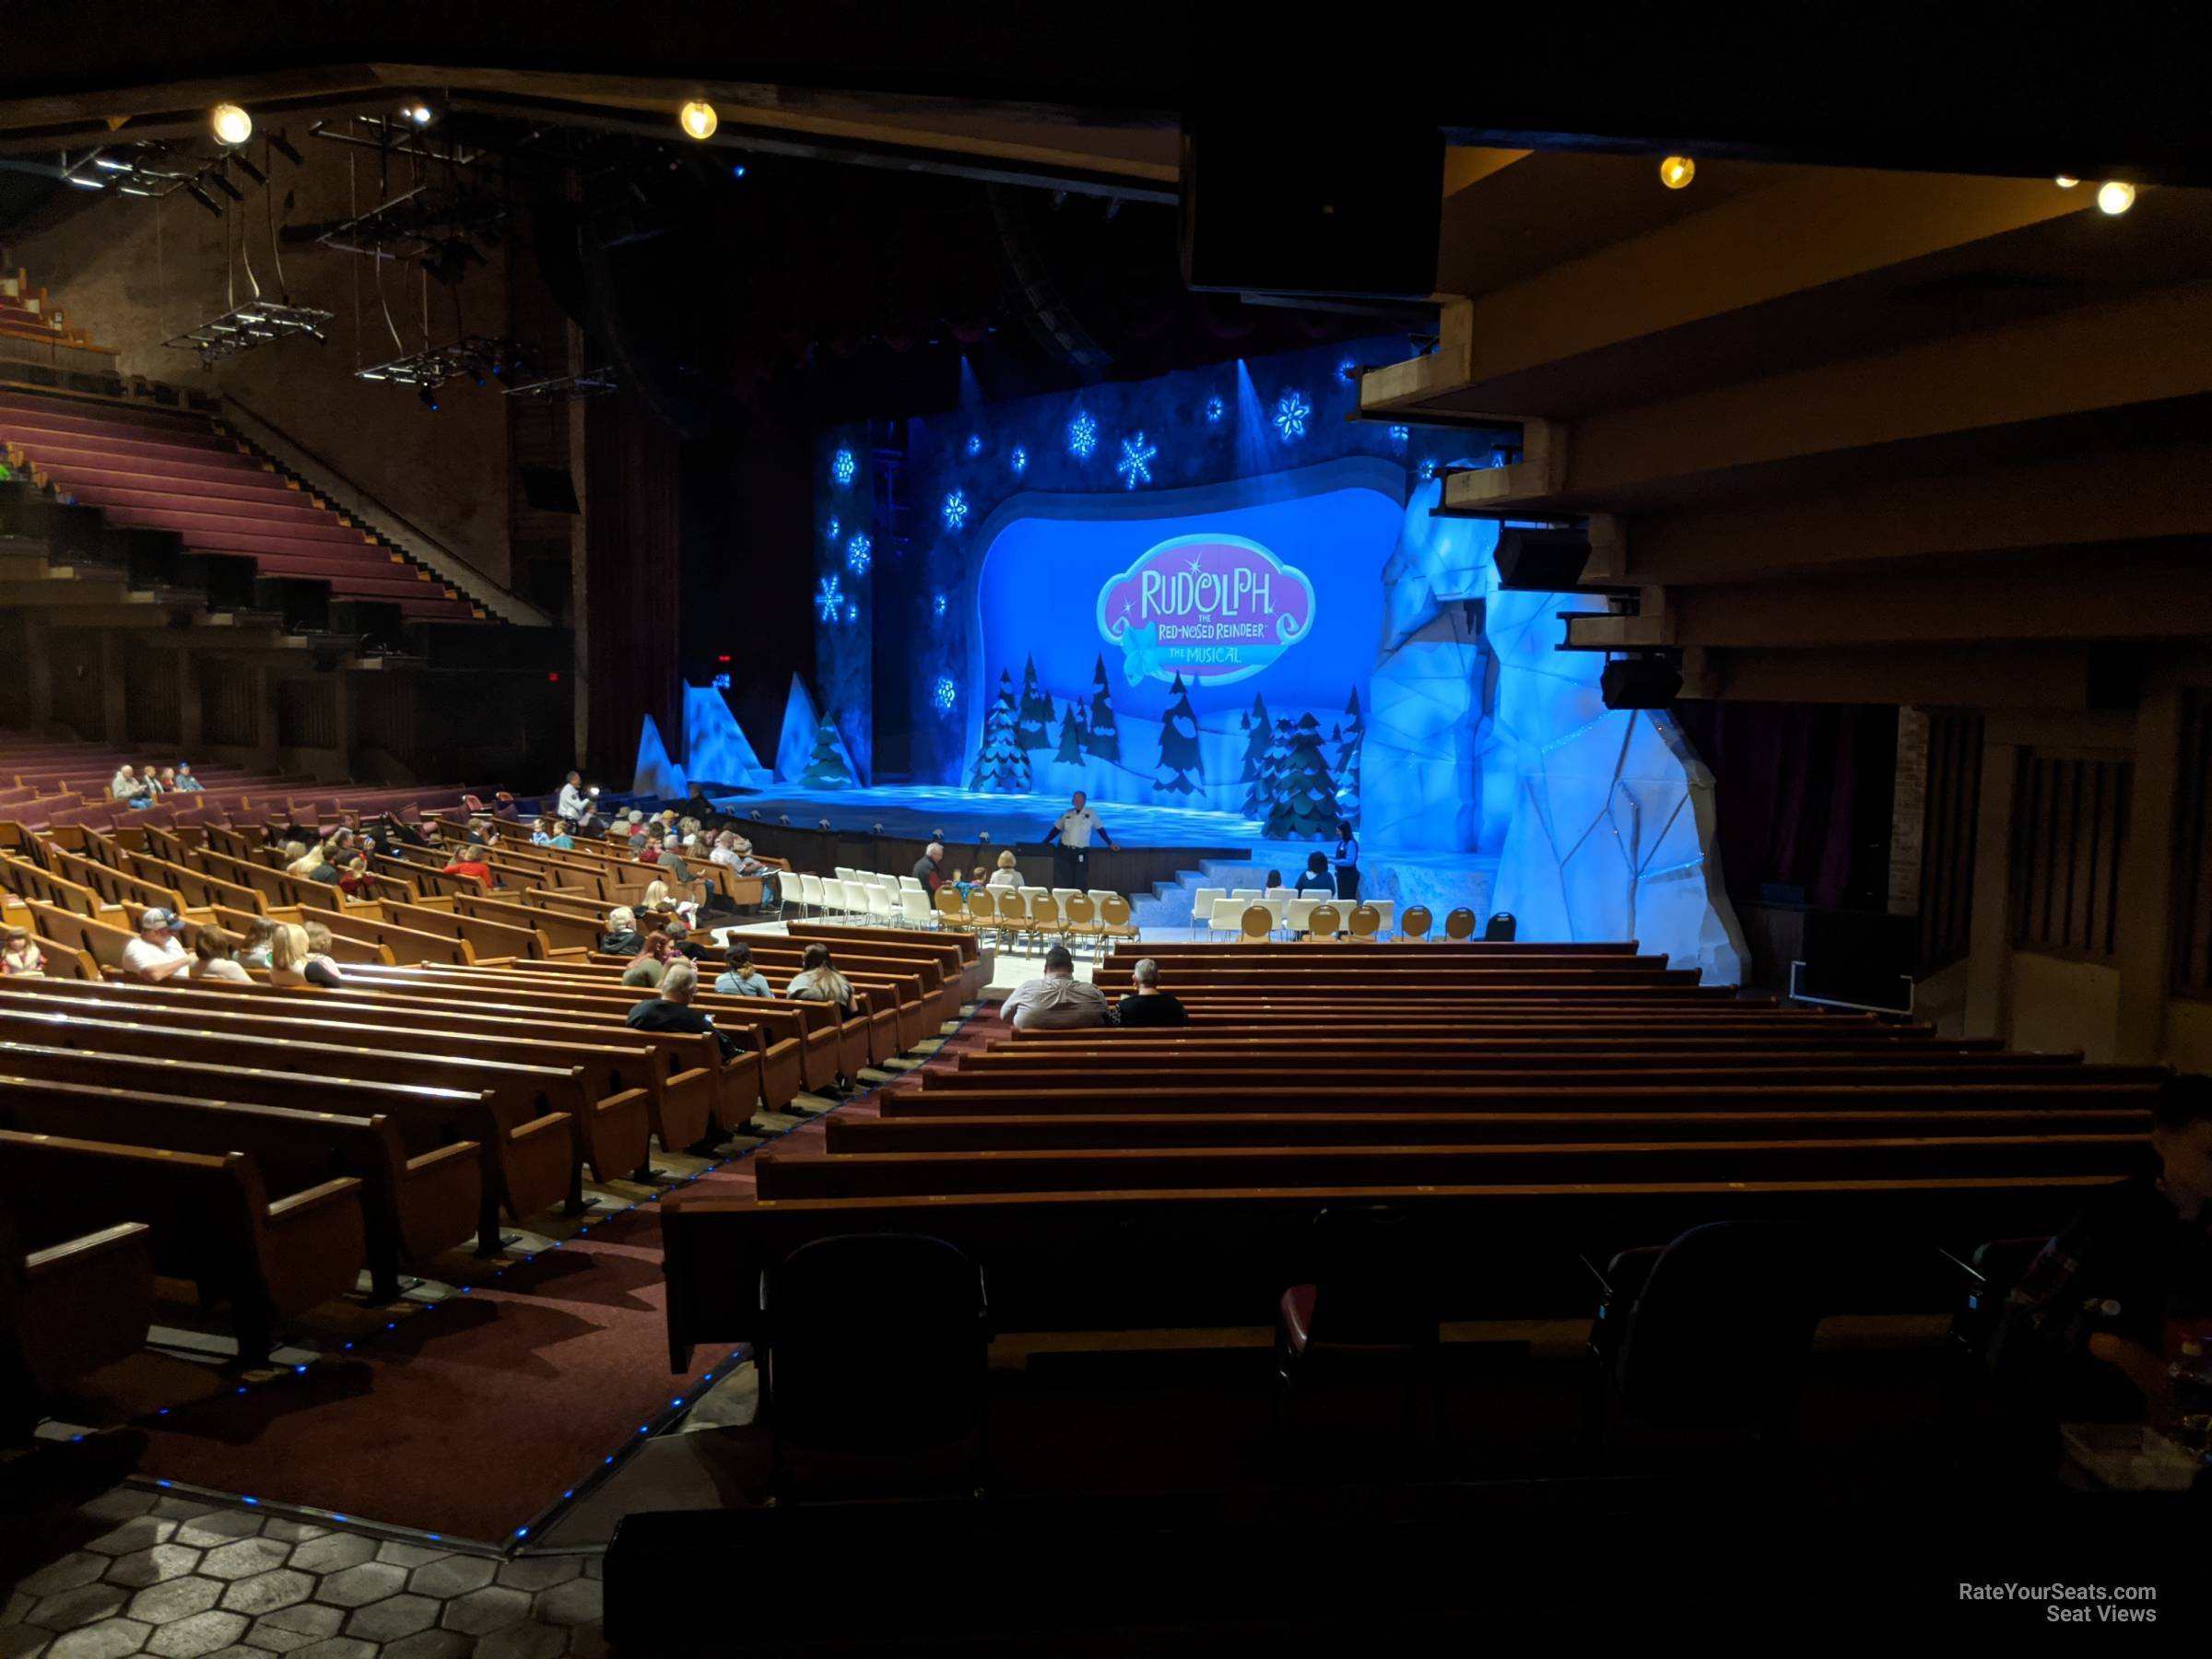 section 8, row v seat view  - grand ole opry house